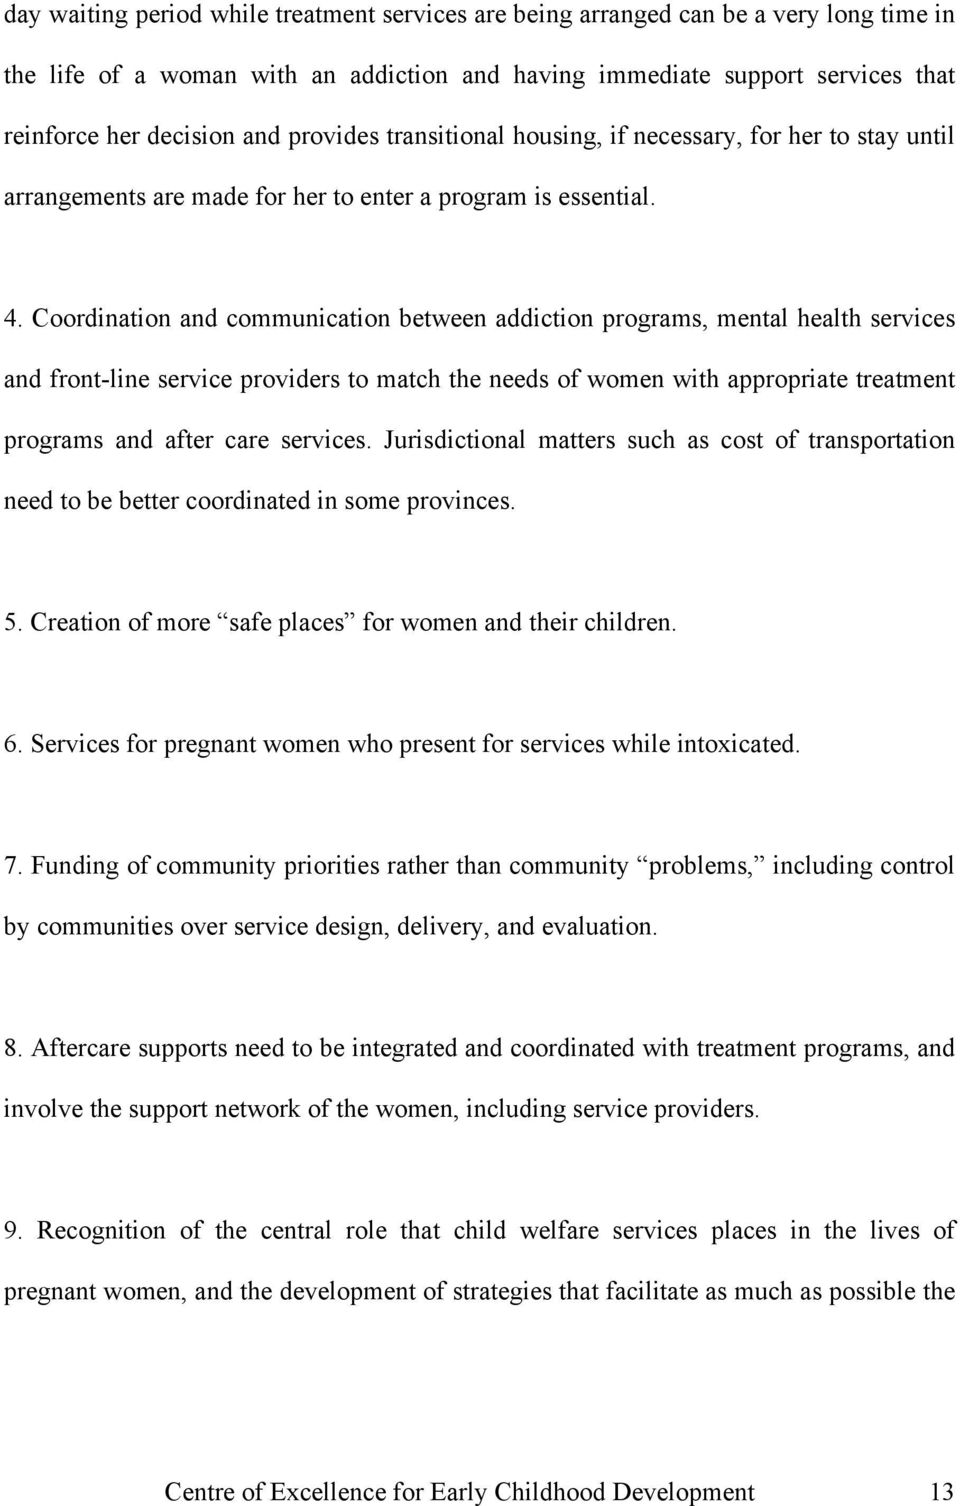 Coordination and communication between addiction programs, mental health services and front-line service providers to match the needs of women with appropriate treatment programs and after care